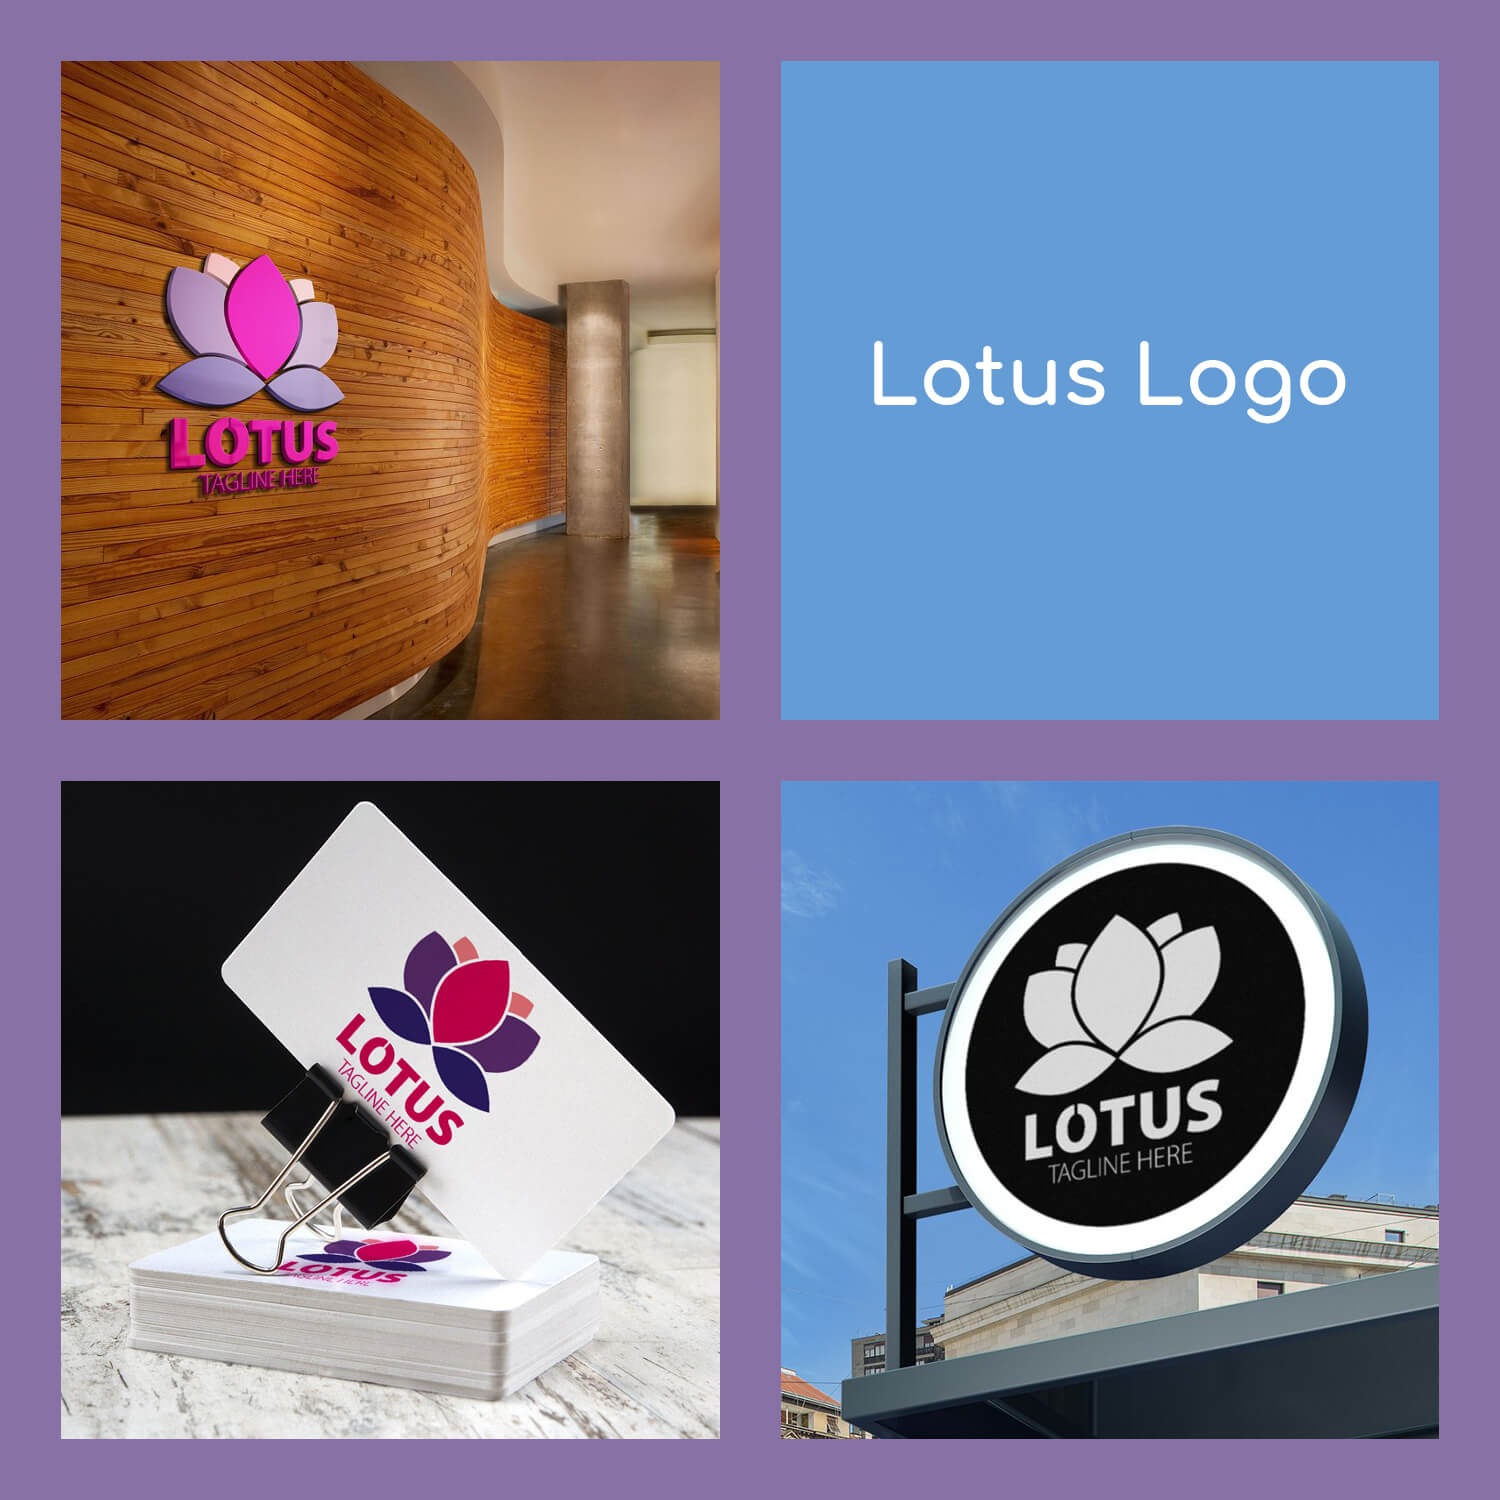 Four pictures with Lotus Tagline Here logos in purple, white, red-blue-violet.